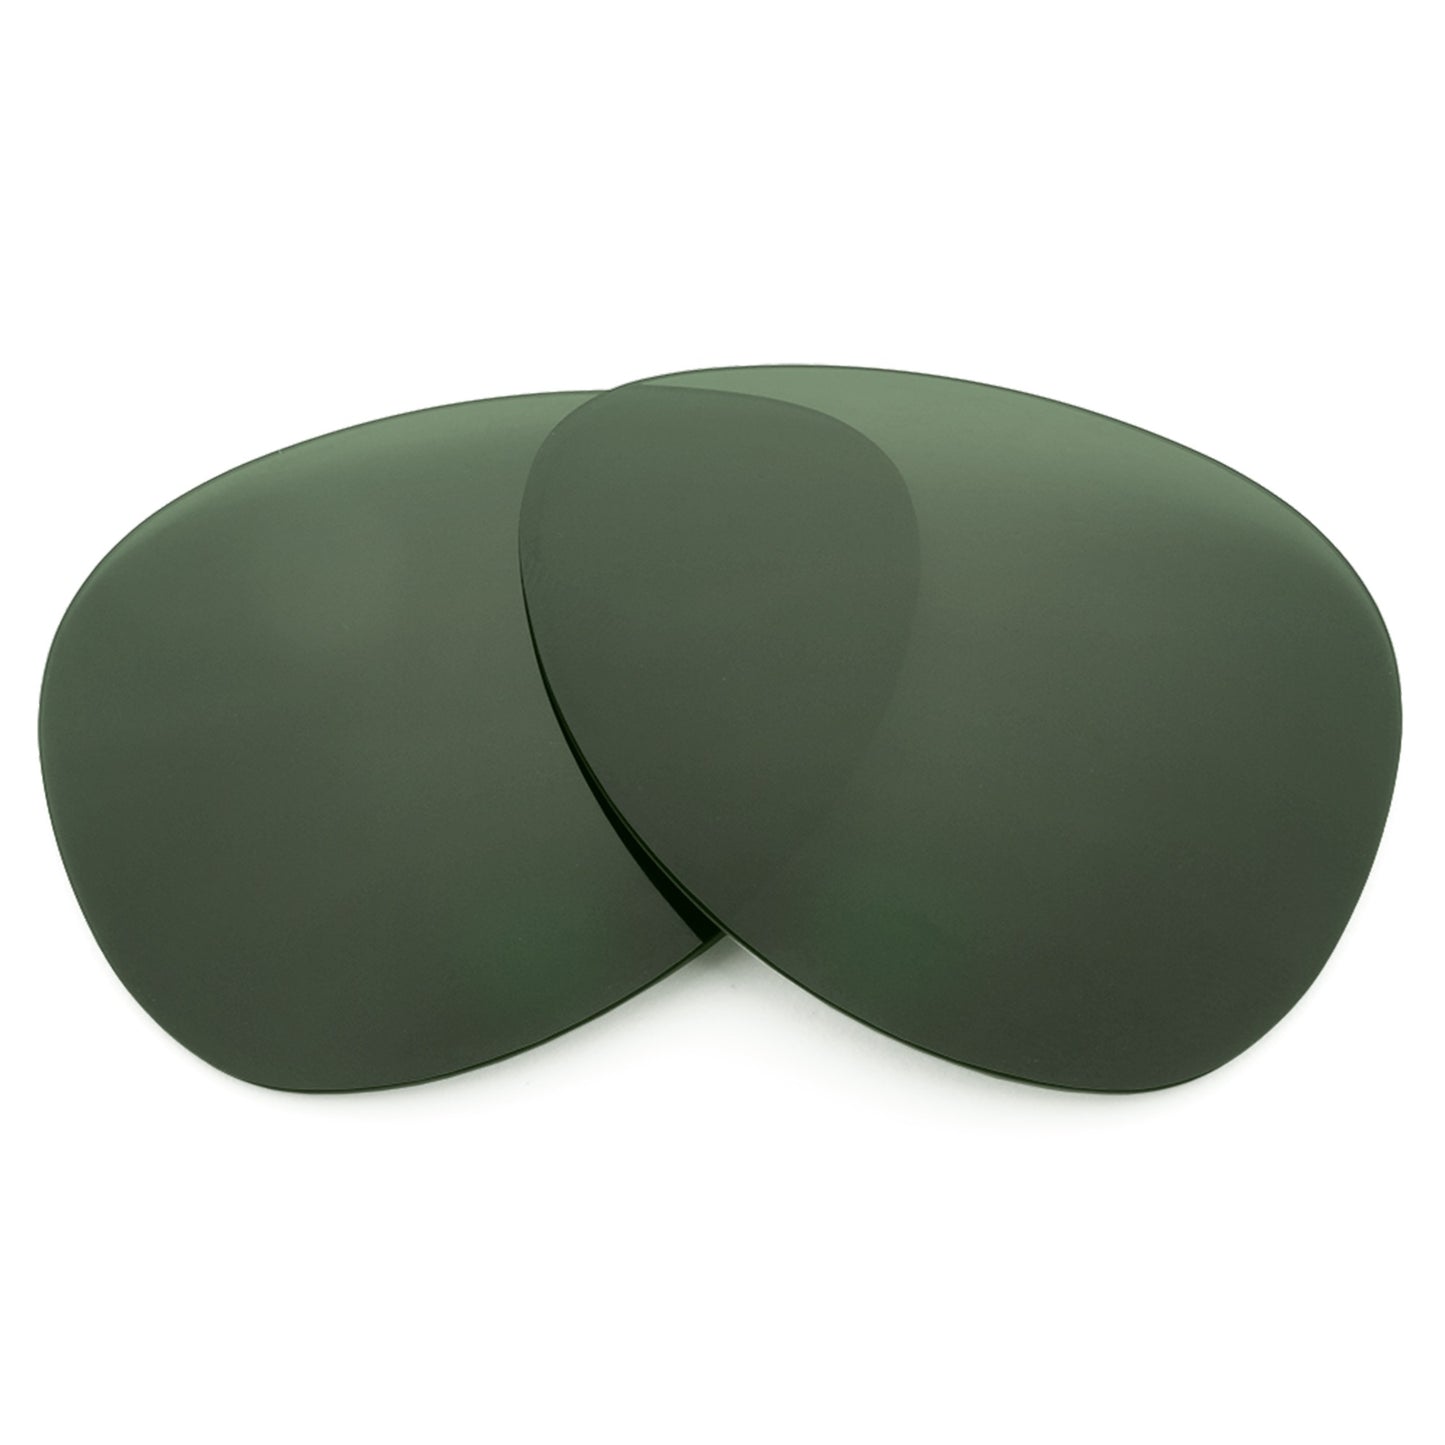 Revant replacement lenses for Ray-Ban Cockpit RB3362 59mm Elite Polarized Gray Green